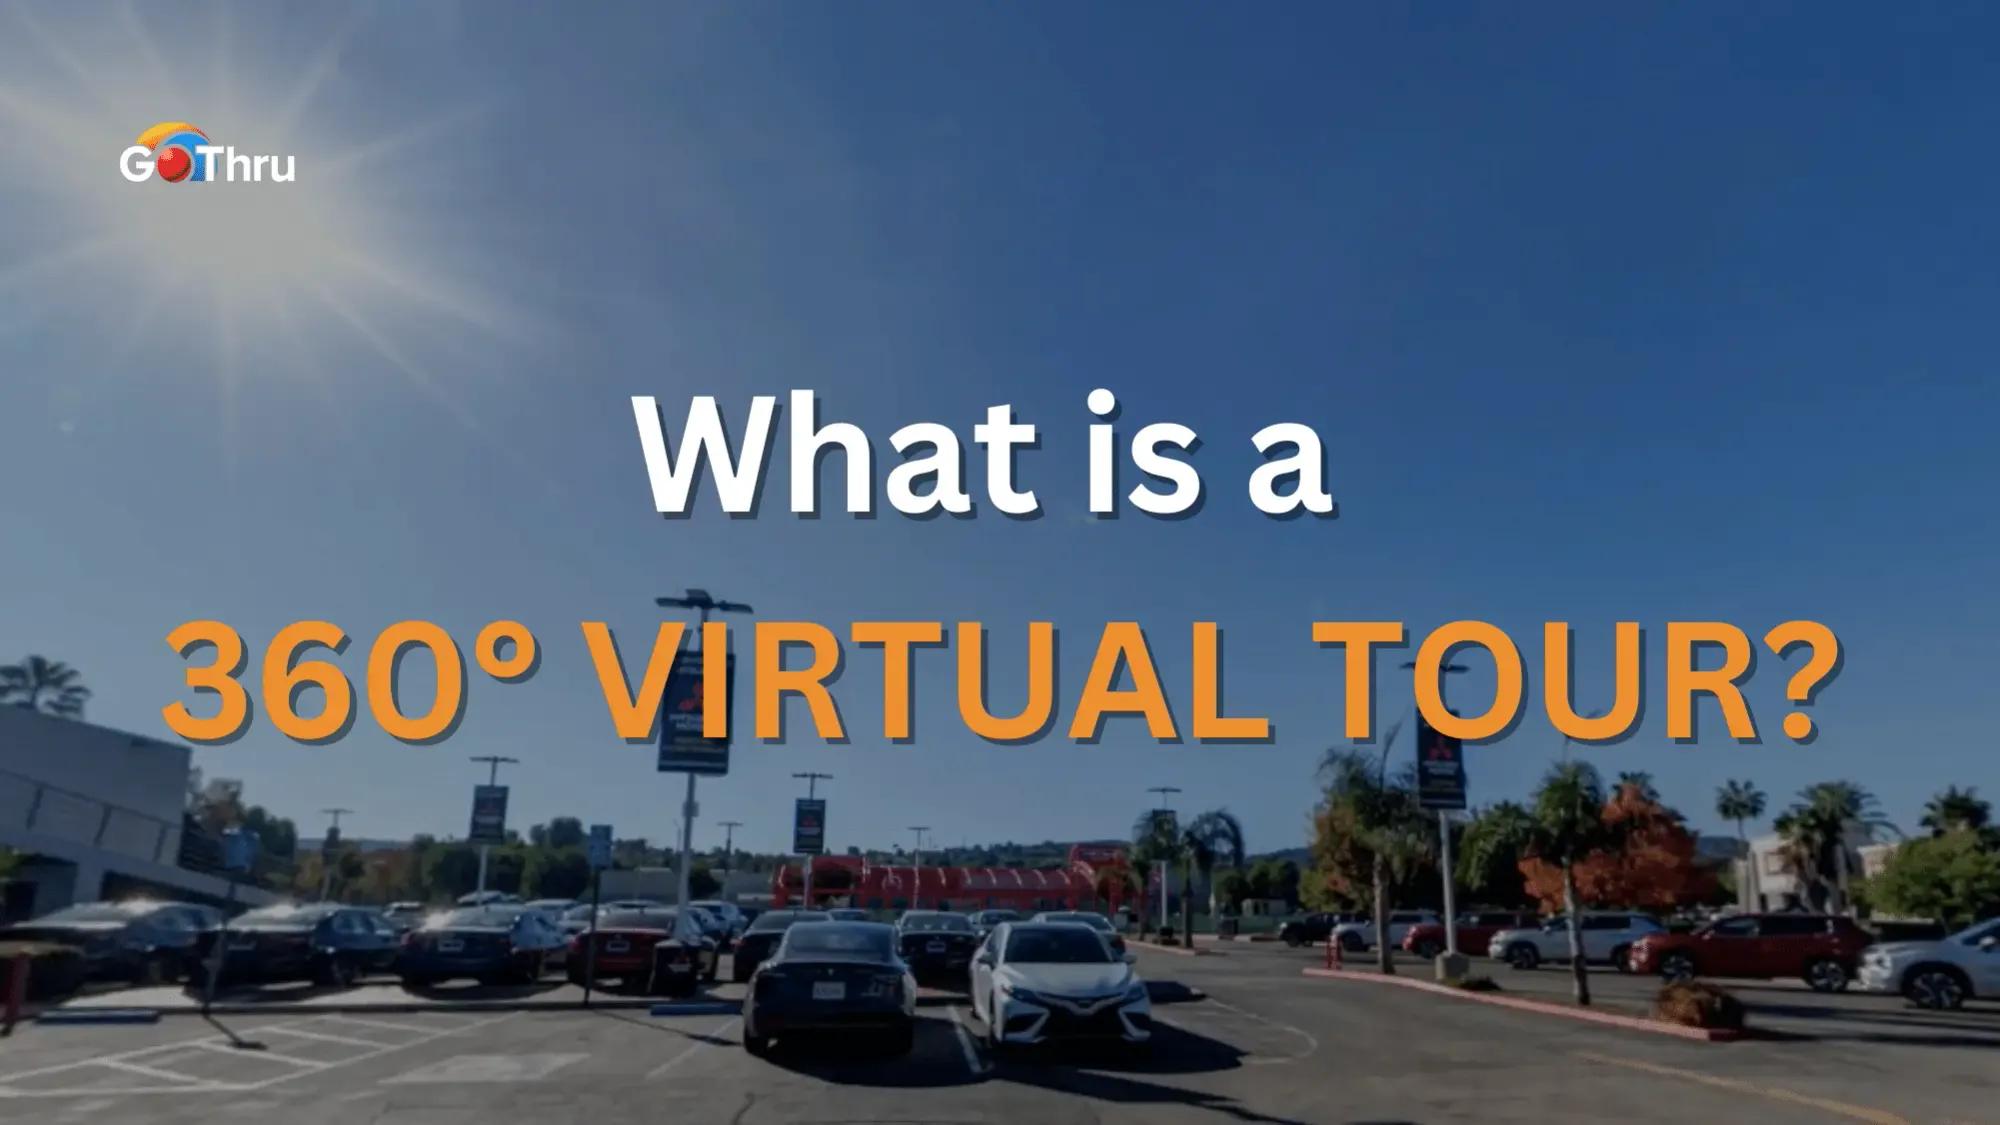 What is a 360 Virtual Tour?
An Introduction to the 360 Virtual Tours